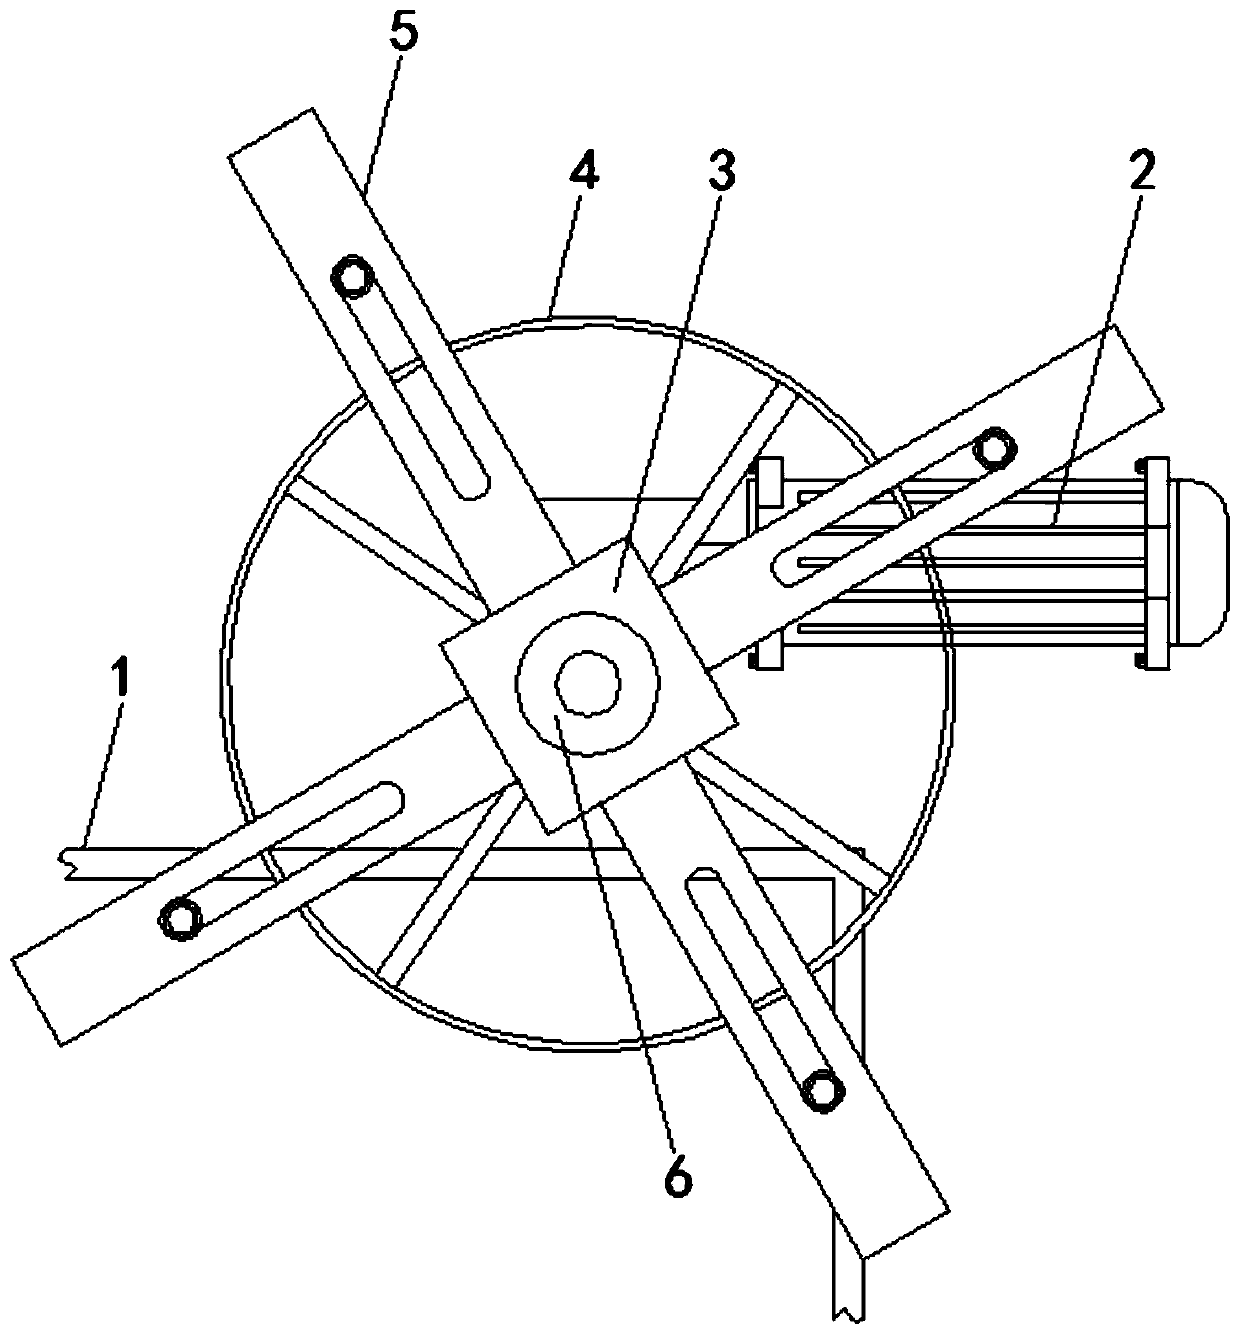 Industrial winch assembly capable of self-locking after stalling by centrifugal effect